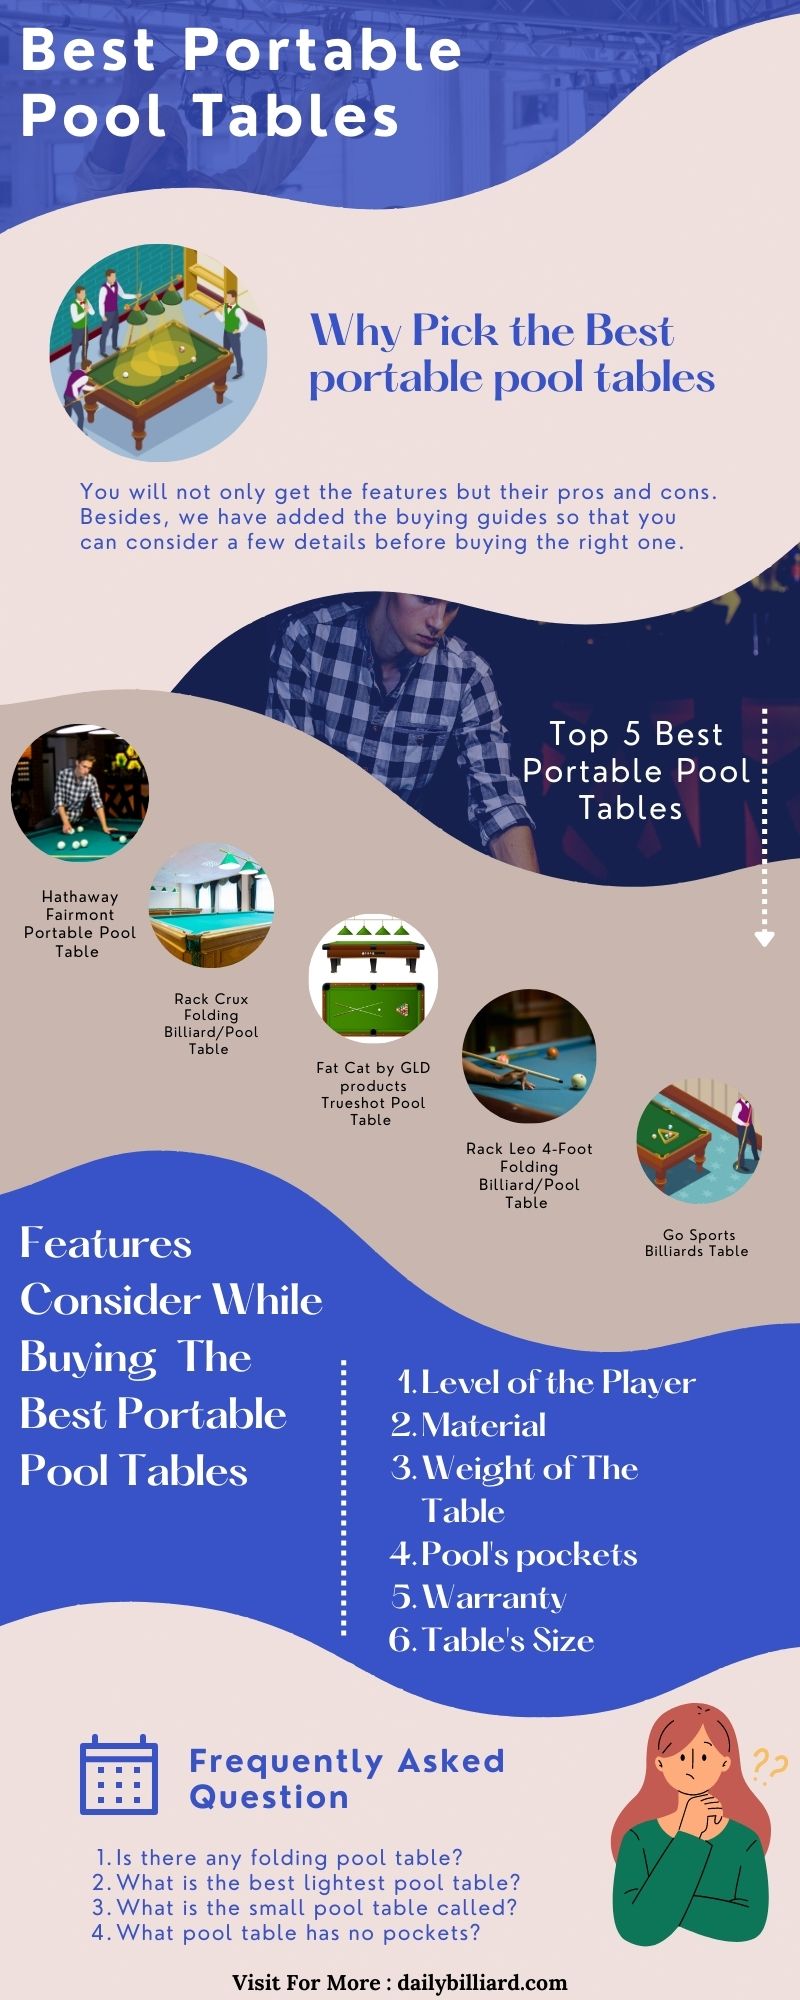 Why Pick the Best portable pool tables